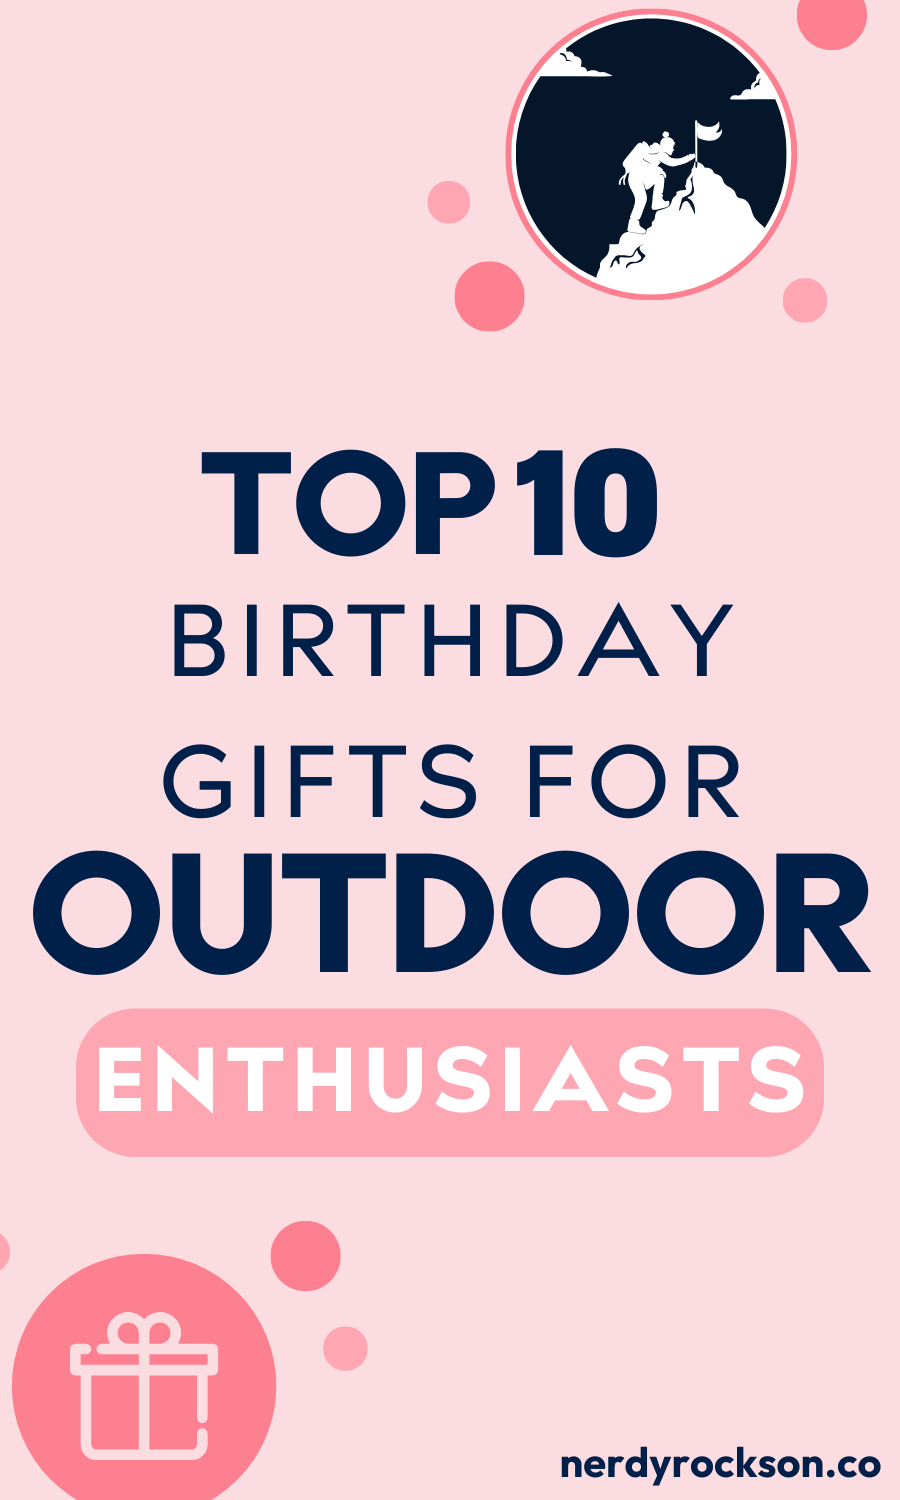 Top 10 Birthday Gifts for Outdoor Enthusiasts